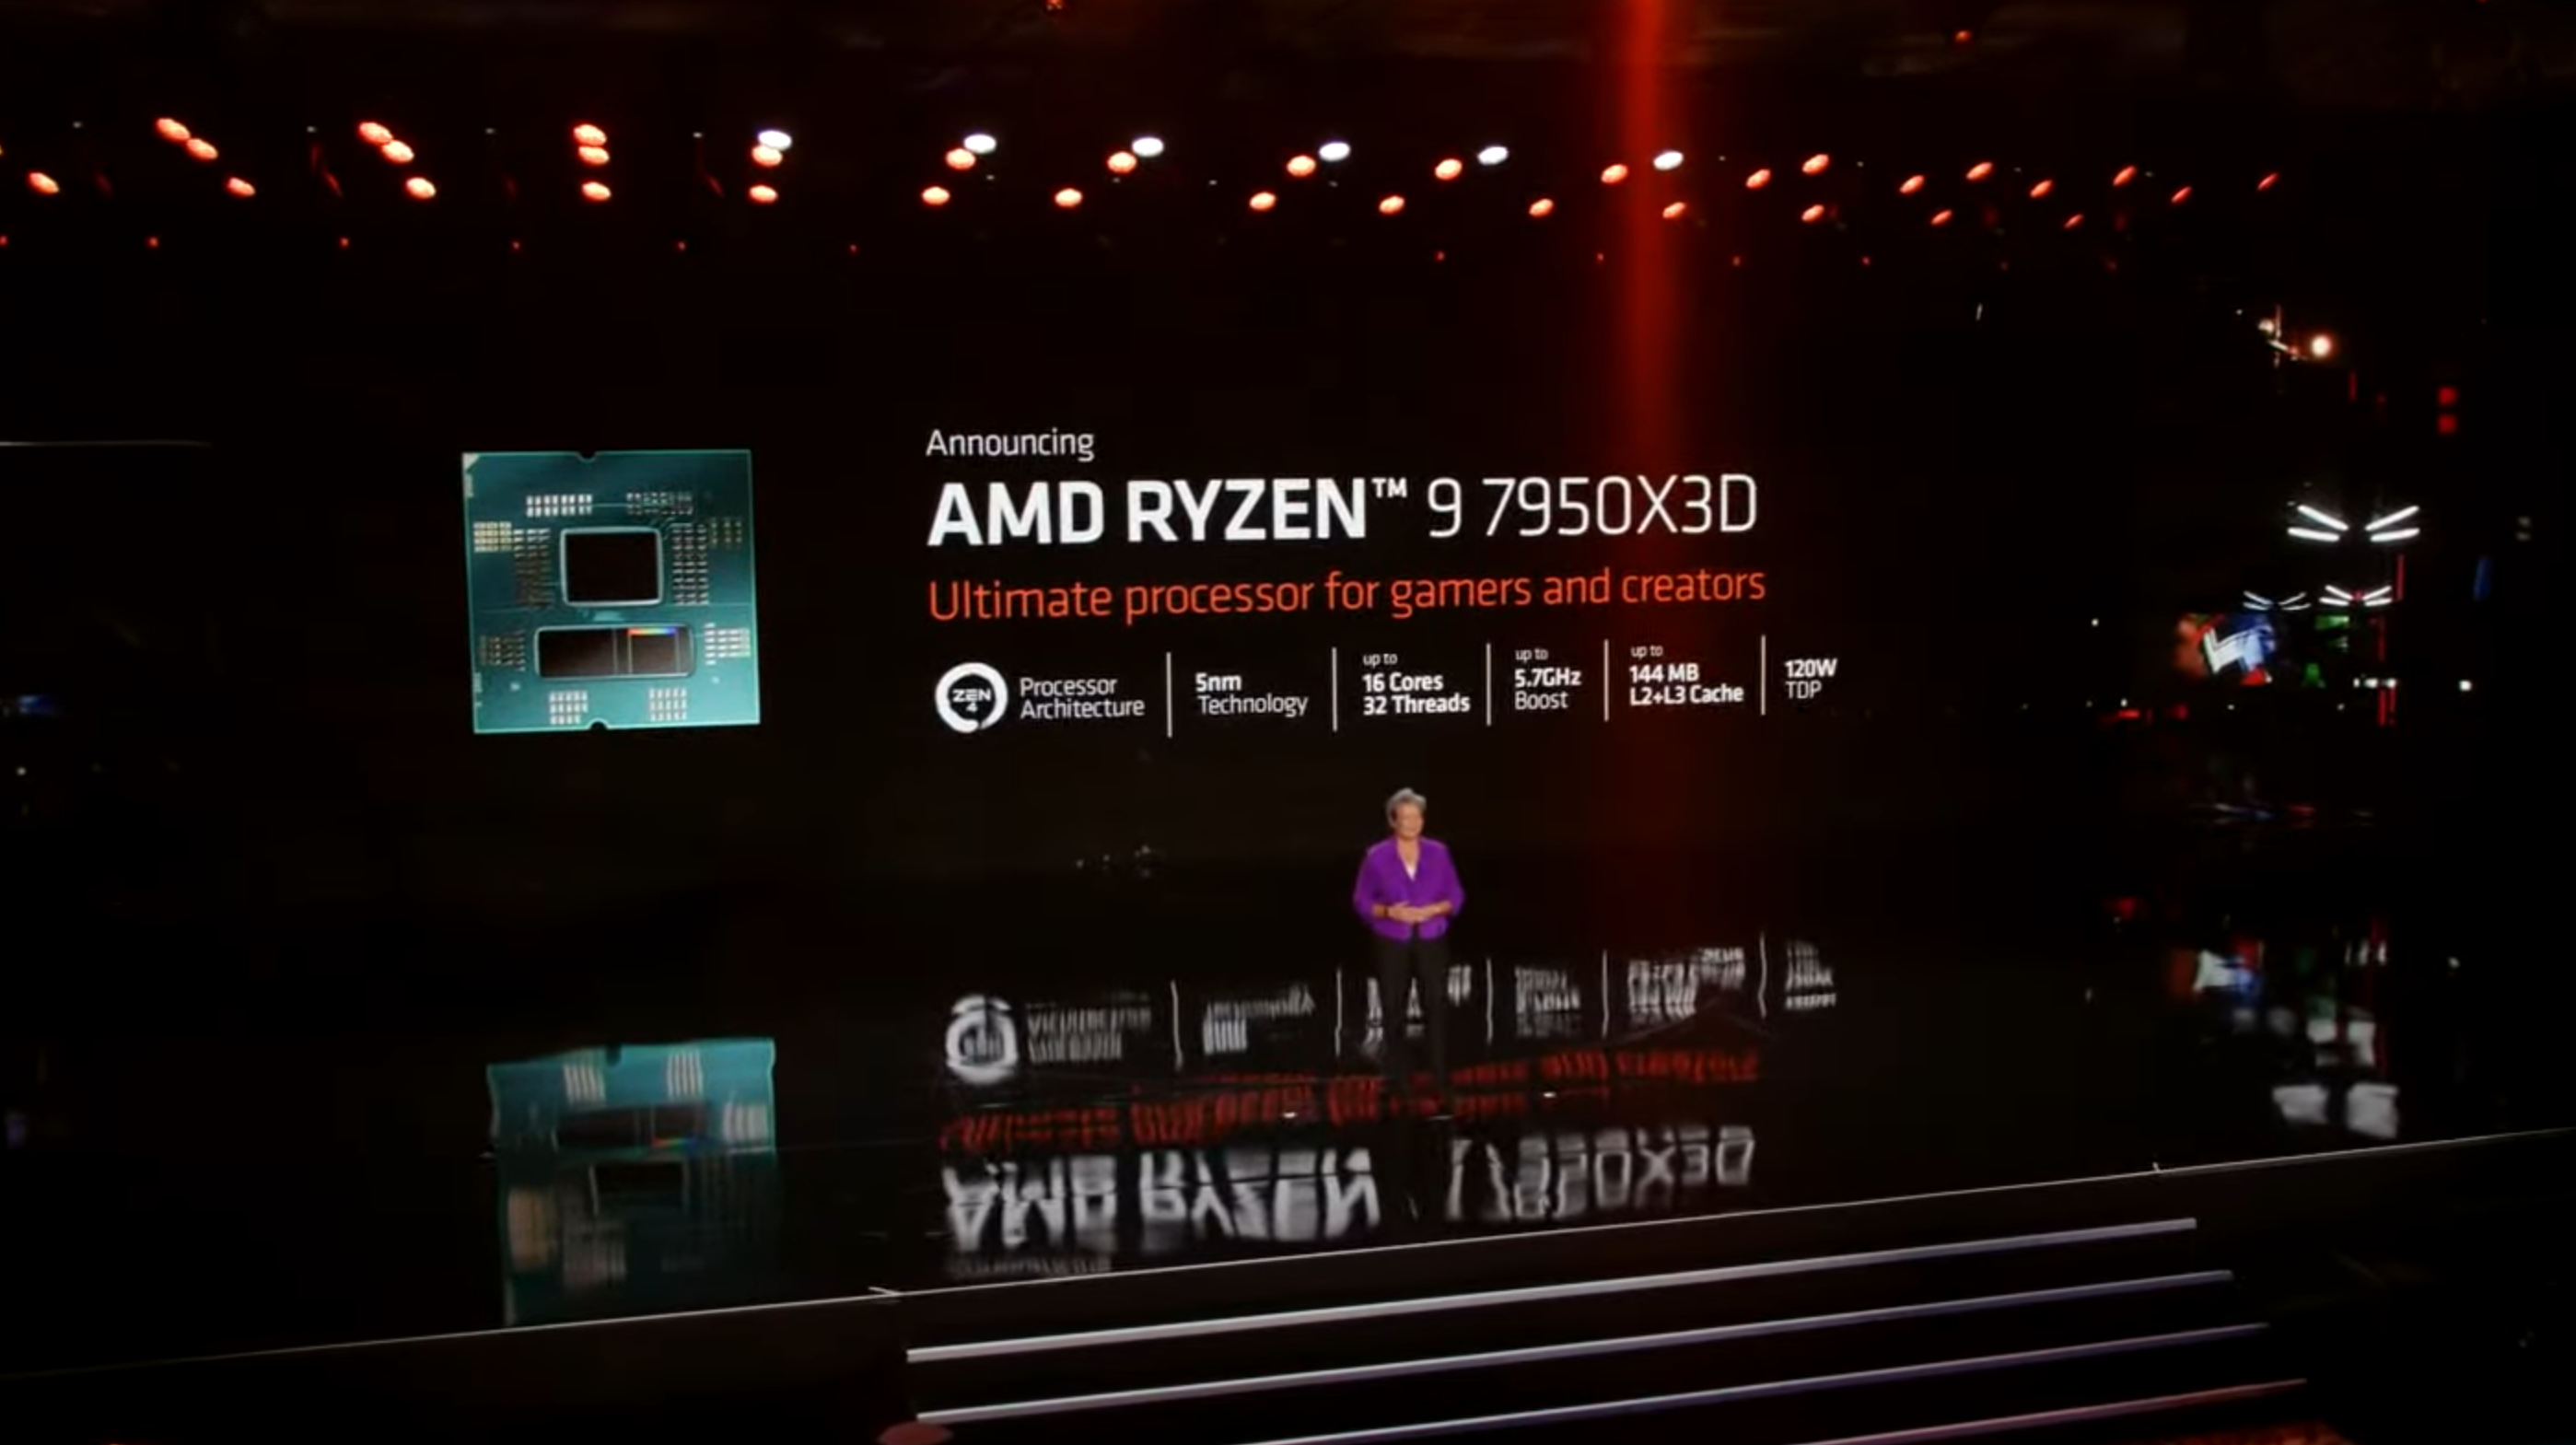 AMD's stage show at CES 2023, showing specifications for the Ryzen 9 7950X3D CPU.